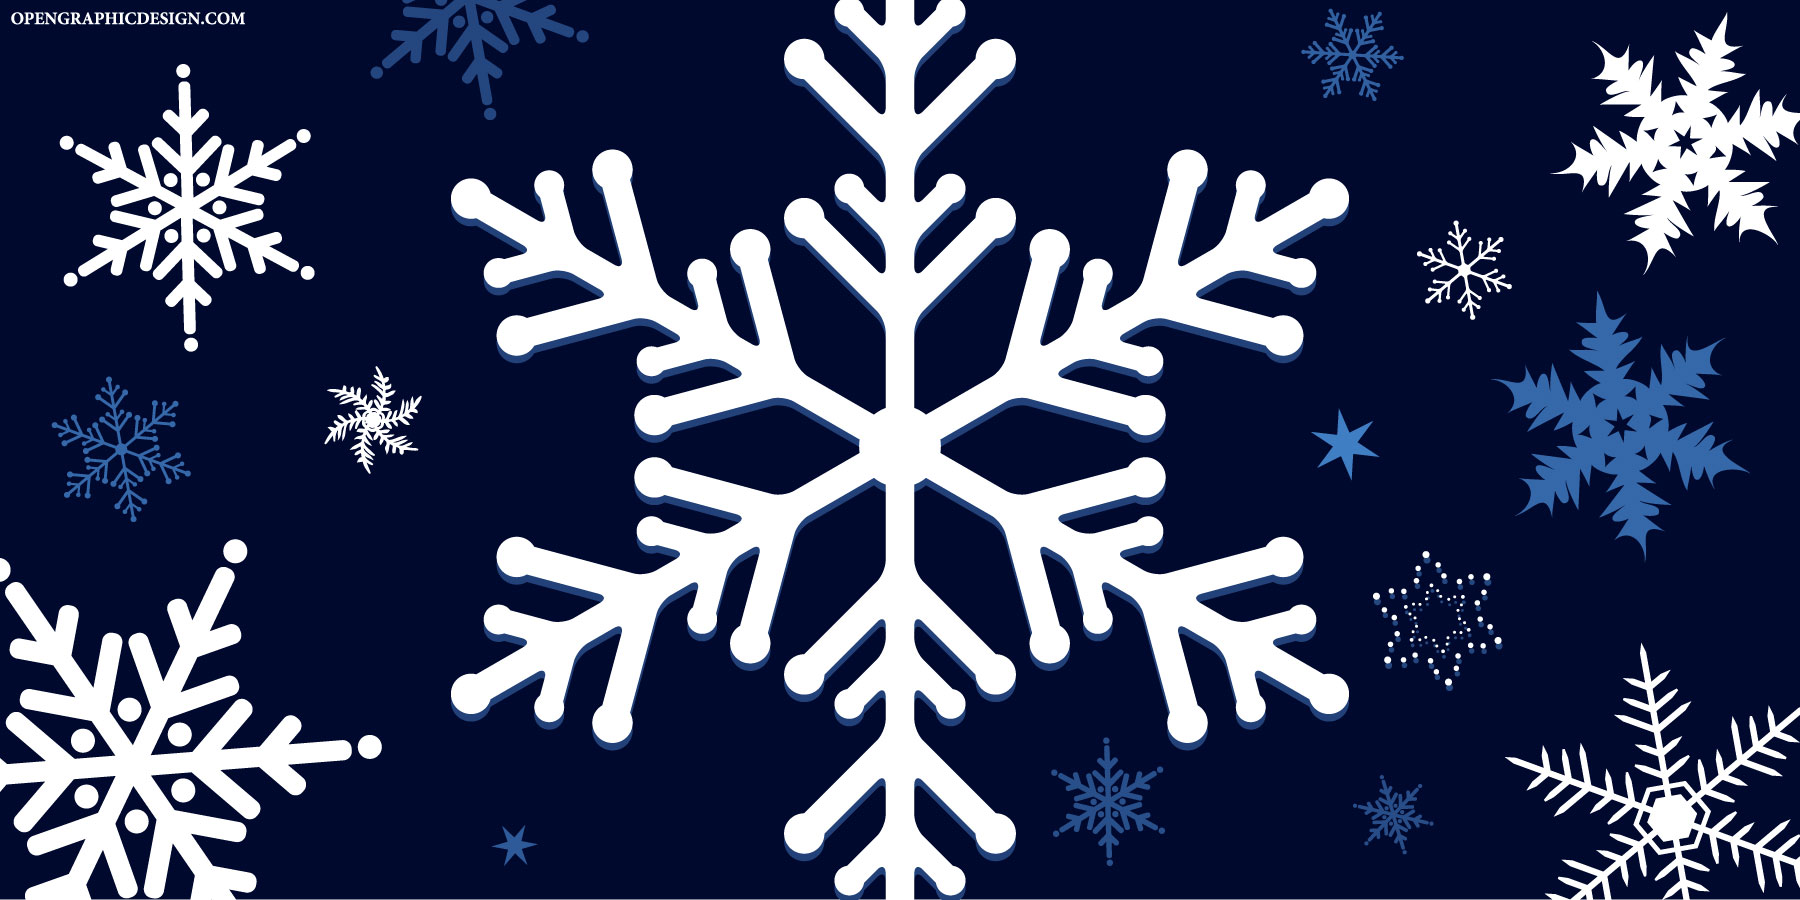 free vector snowflake clipart